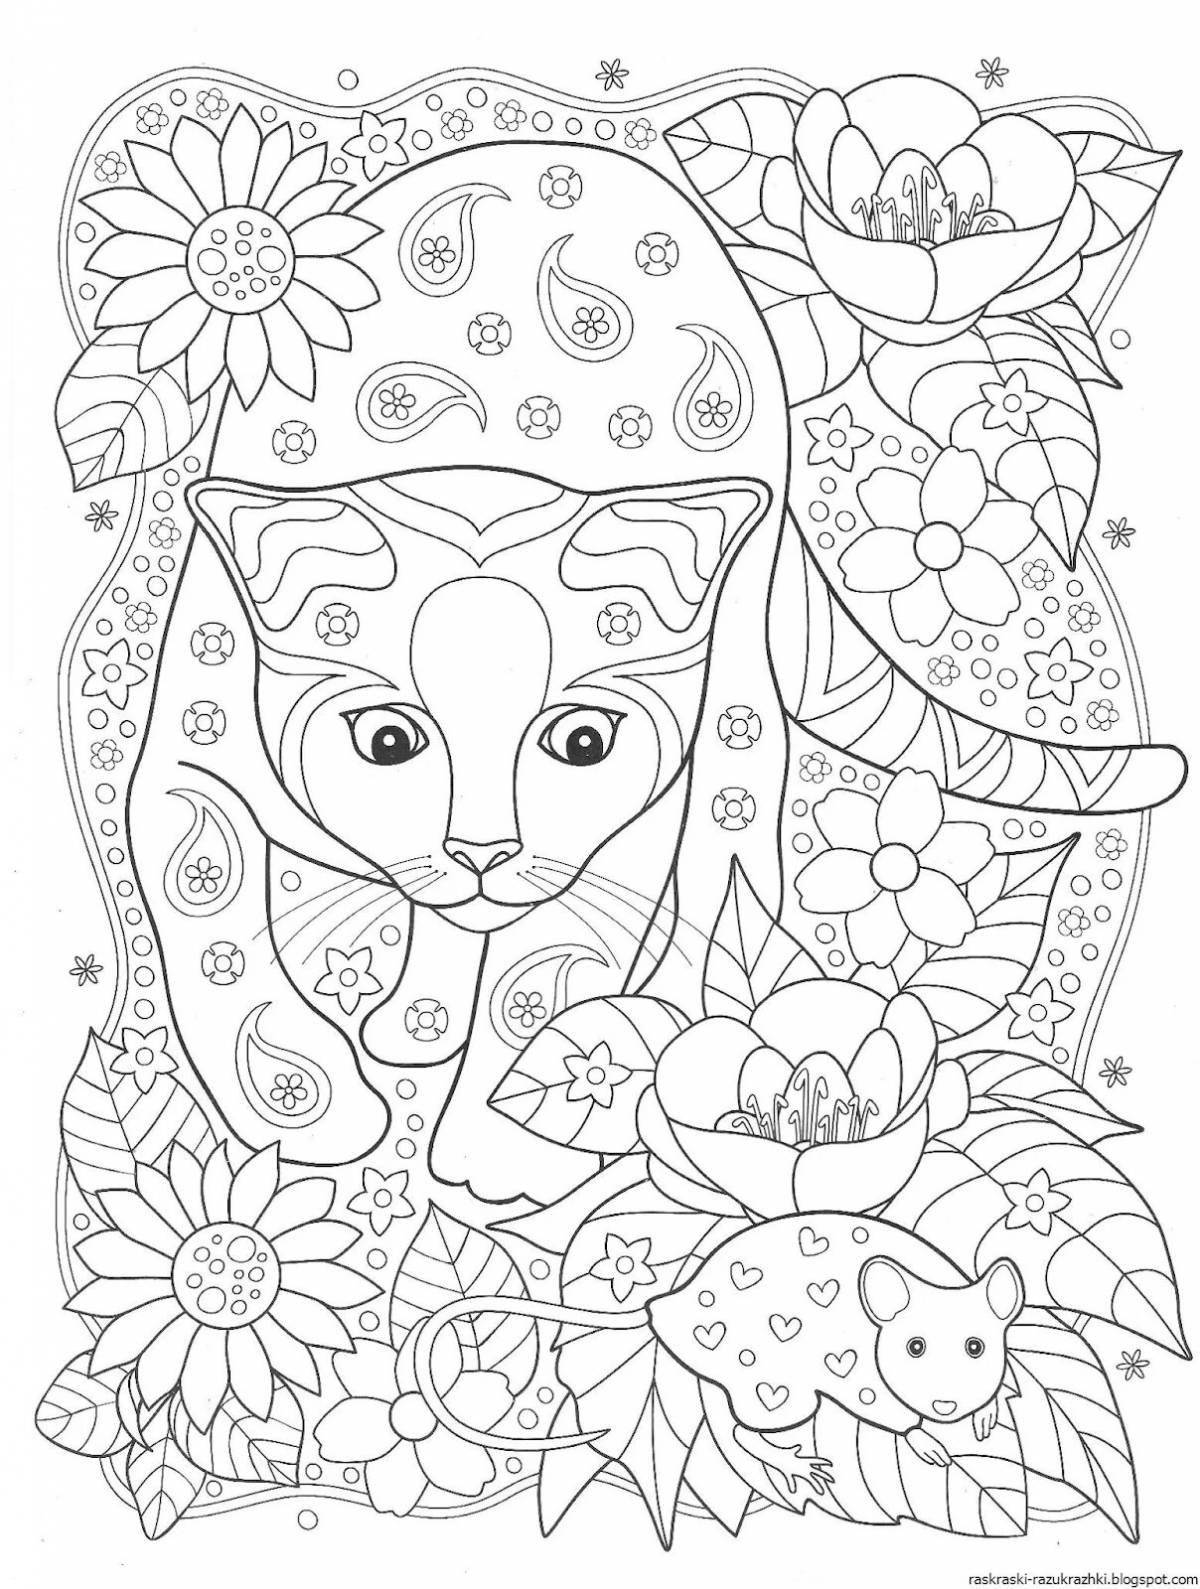 Exciting coloring book, very interesting